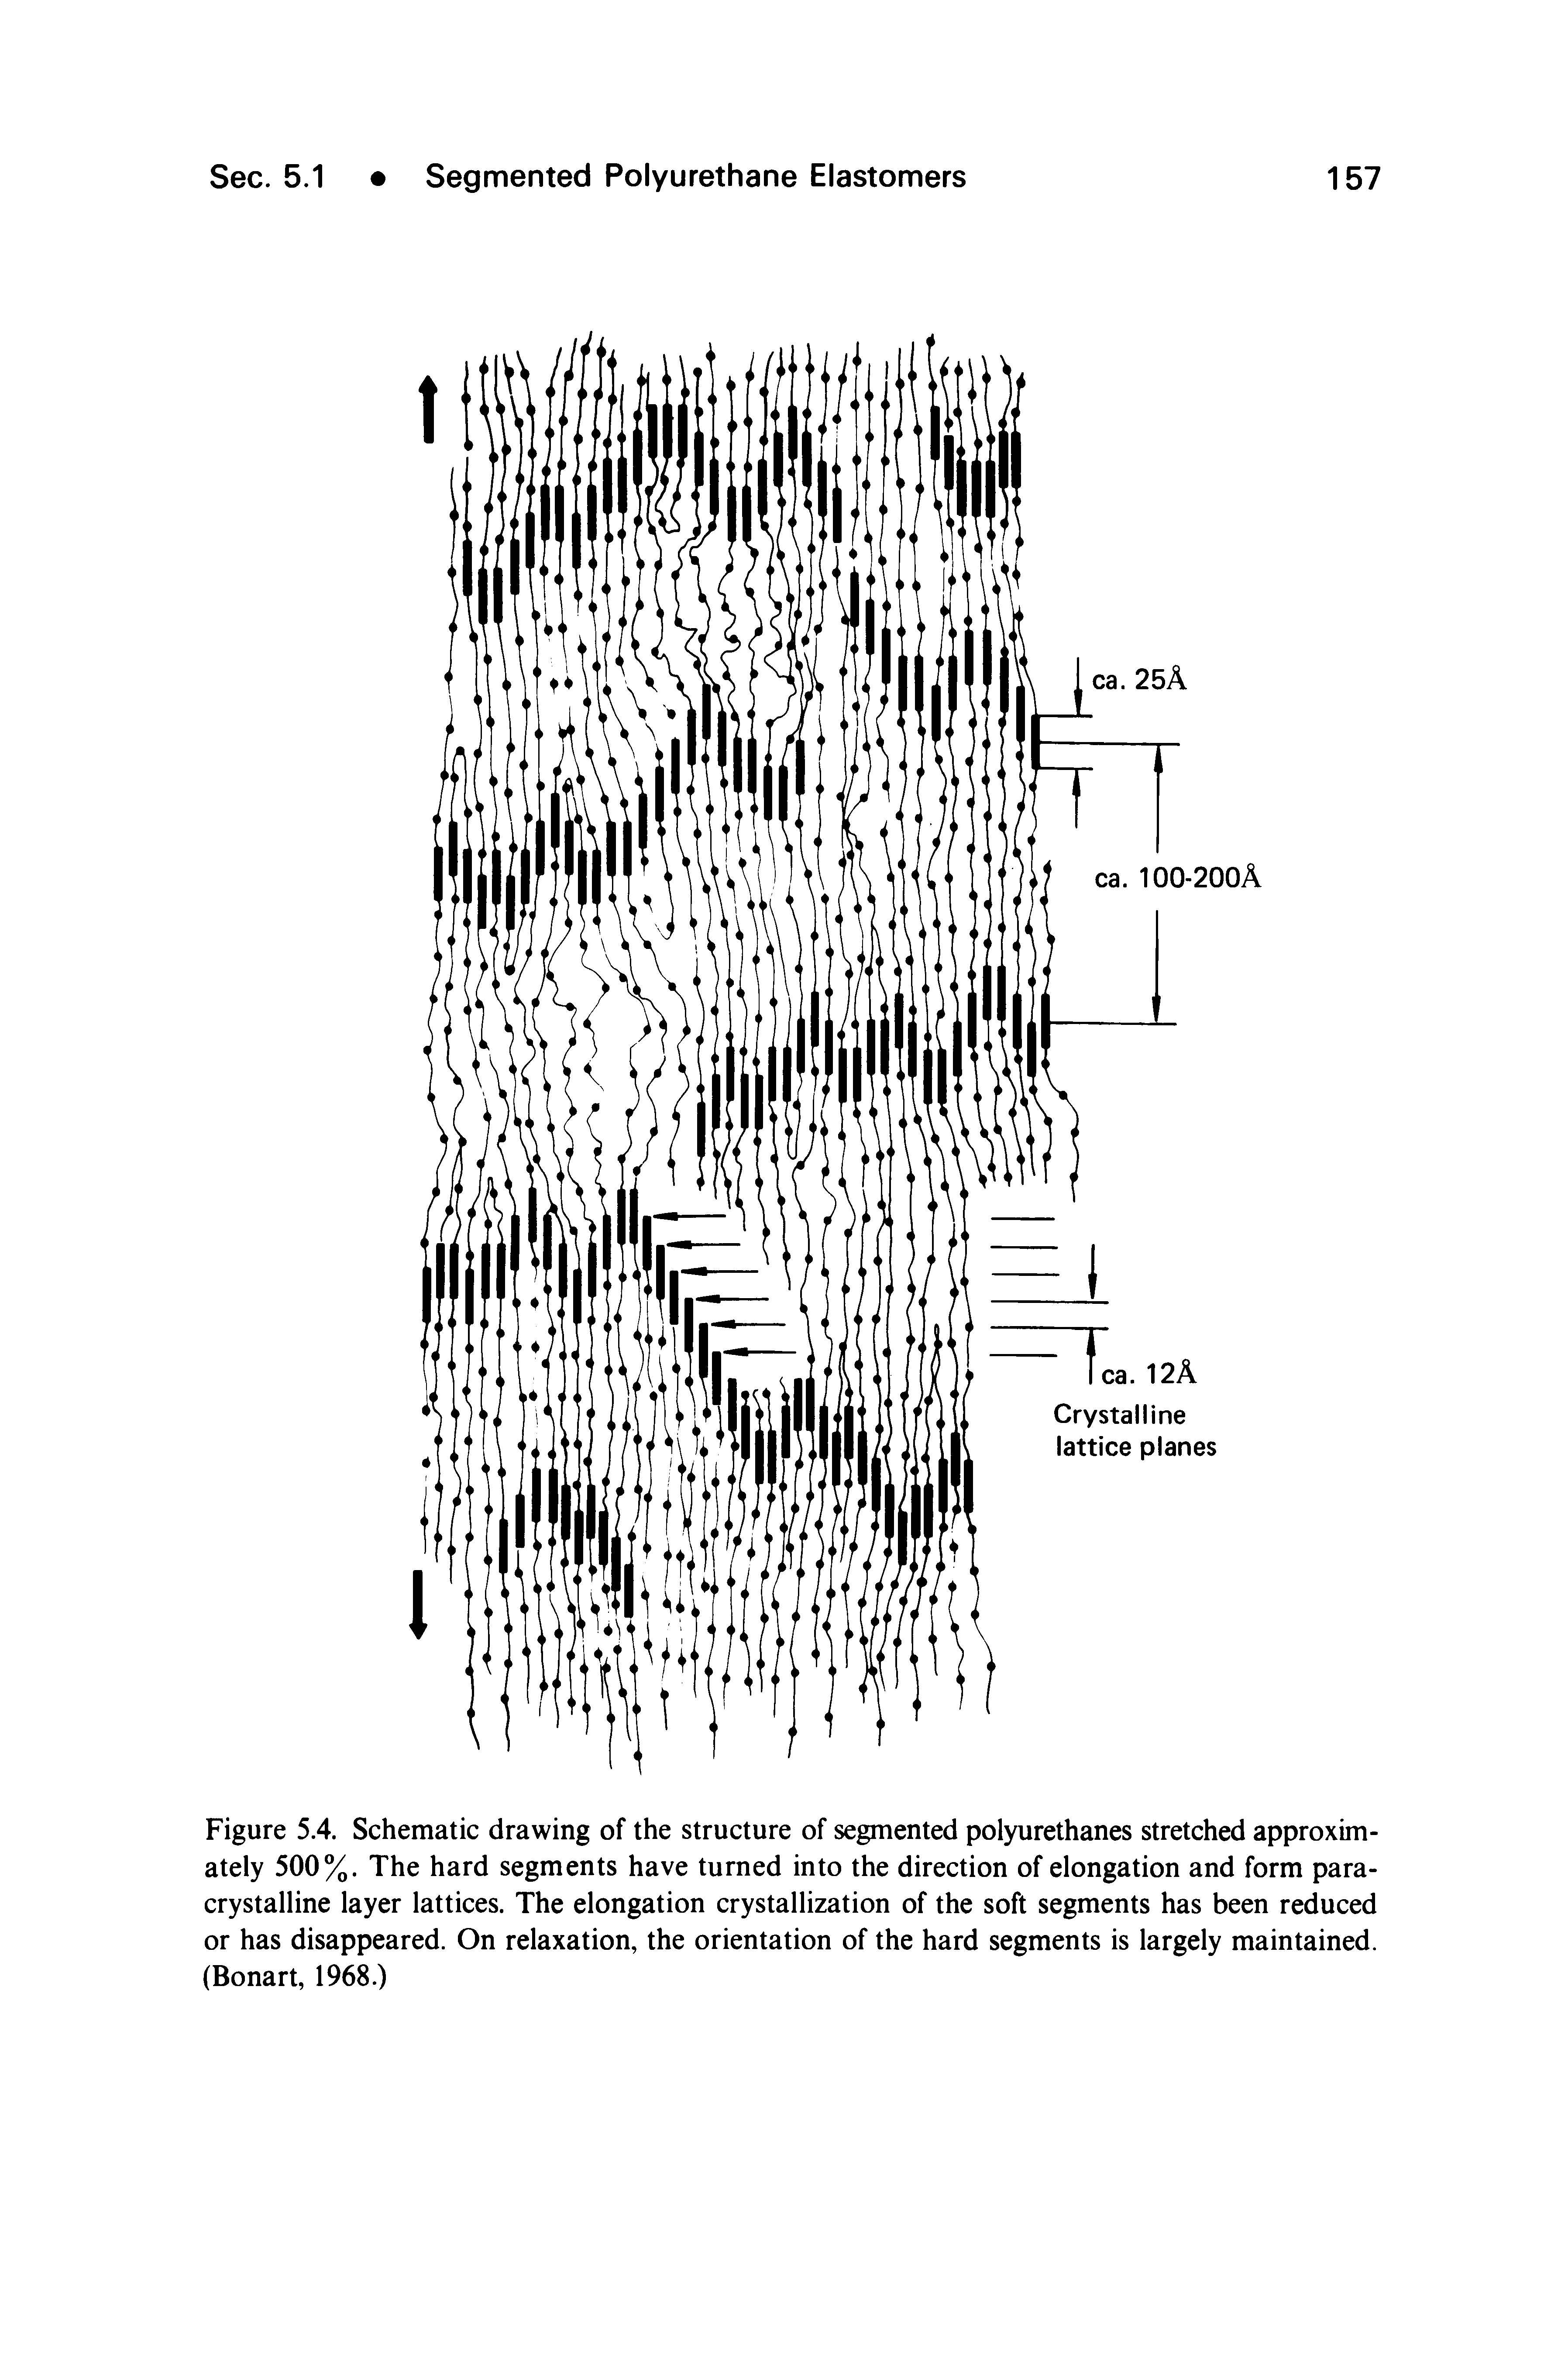 Figure 5.4. Schematic drawing of the structure of segmented polyurethanes stretched approximately 500%. The hard segments have turned into the direction of elongation and form para-crystalline layer lattices. The elongation crystallization of the soft segments has been reduced or has disappeared. On relaxation, the orientation of the hard segments is largely maintained. (Bonart, 1968.)...